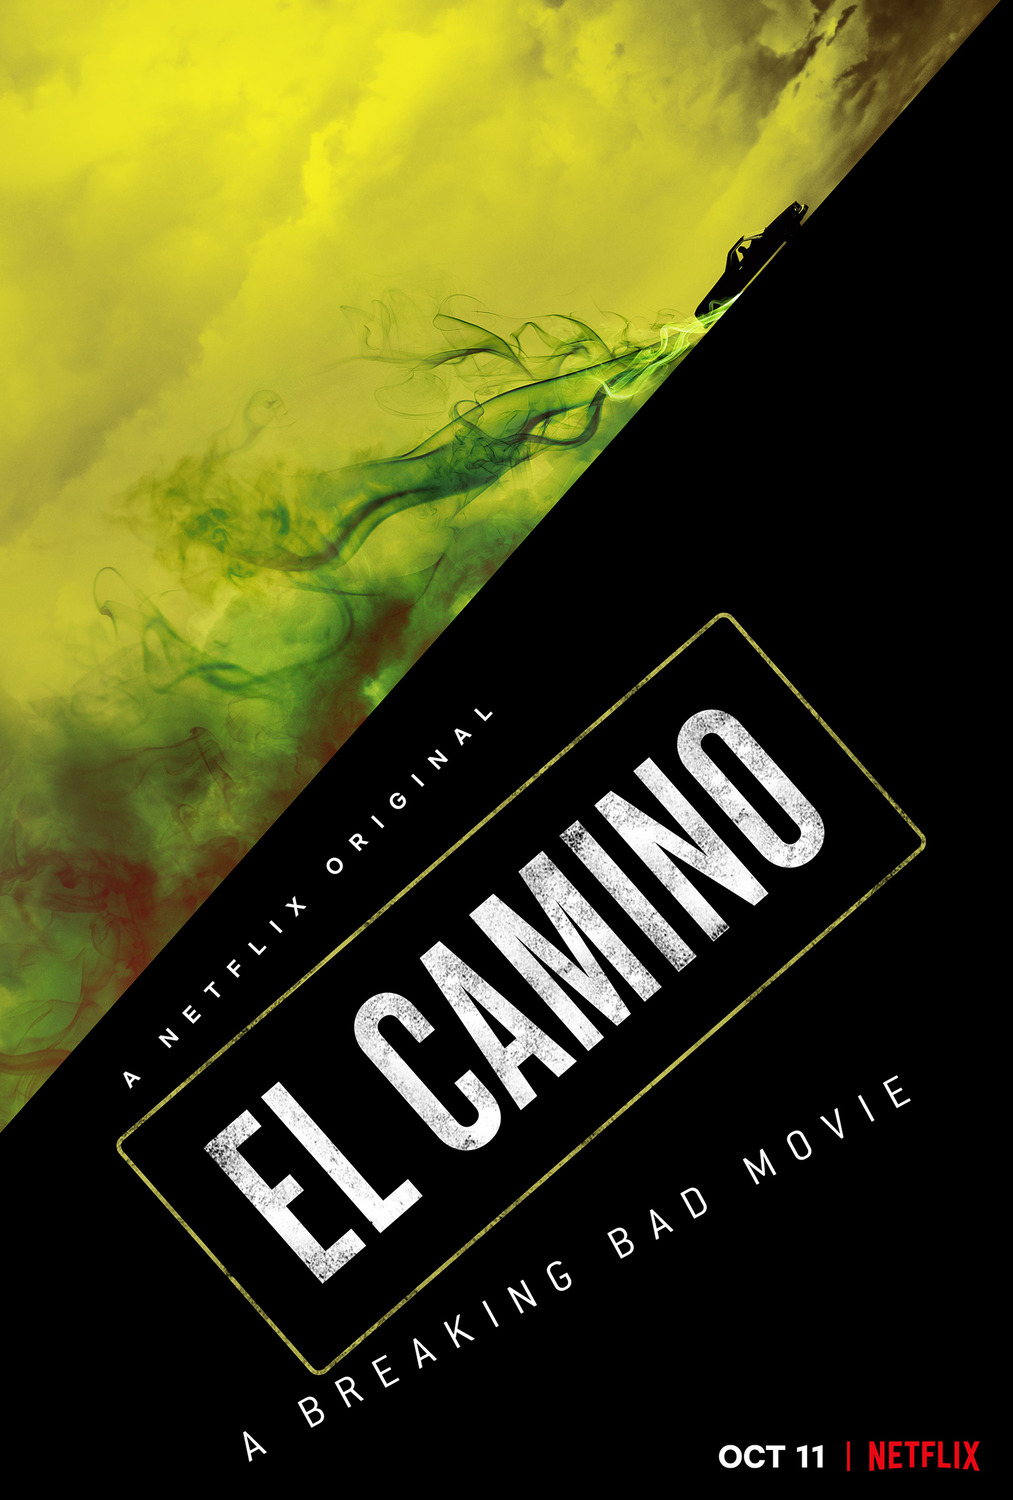 Extra Large TV Poster Image for El Camino: A Breaking Bad Movie (#1 of 2)